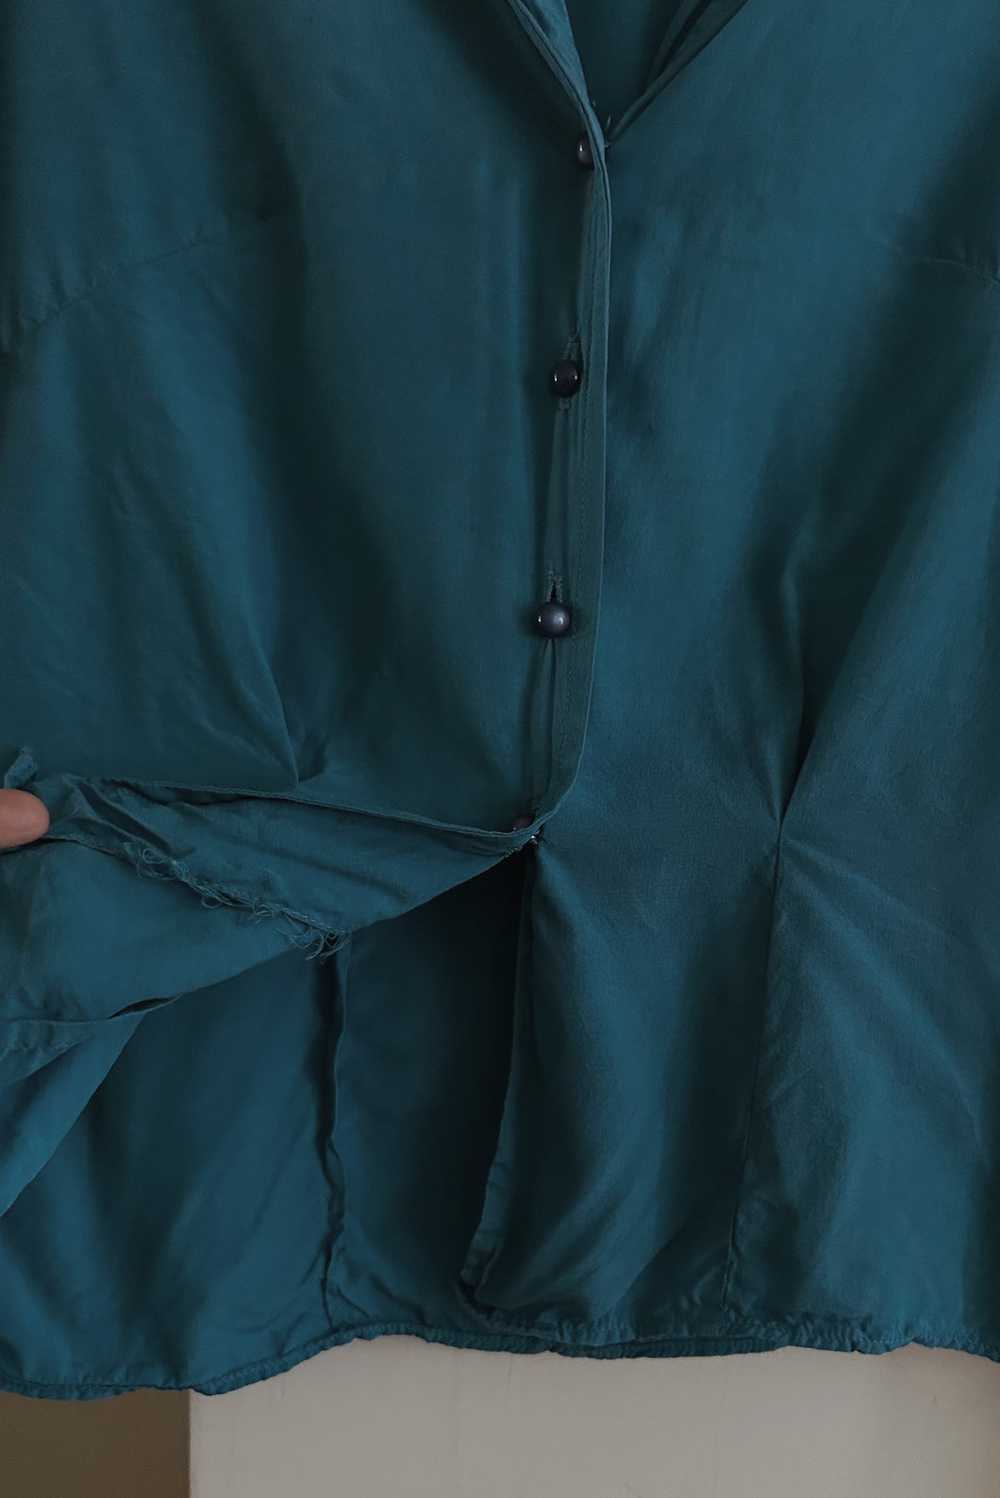 1950's TEAL SILK BUTTON BLOUSE - image 2